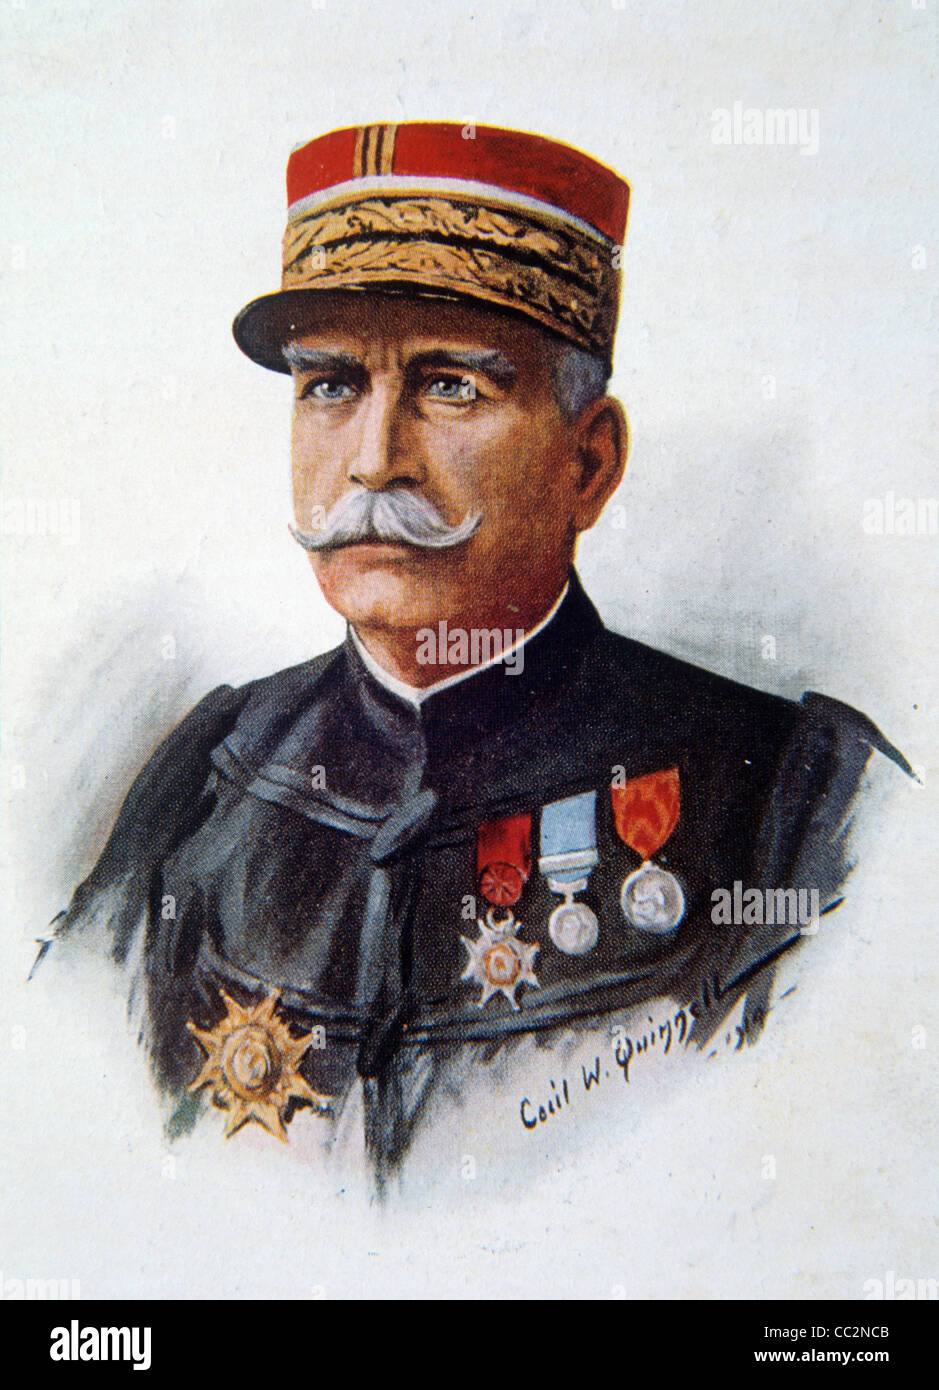 Portrait of General Joffre, Joseph Jacques Césaire Joffre (1852-1931) French General and Army Commander during World War I or The Great War. Vintage Illustration or Engraving Stock Photo